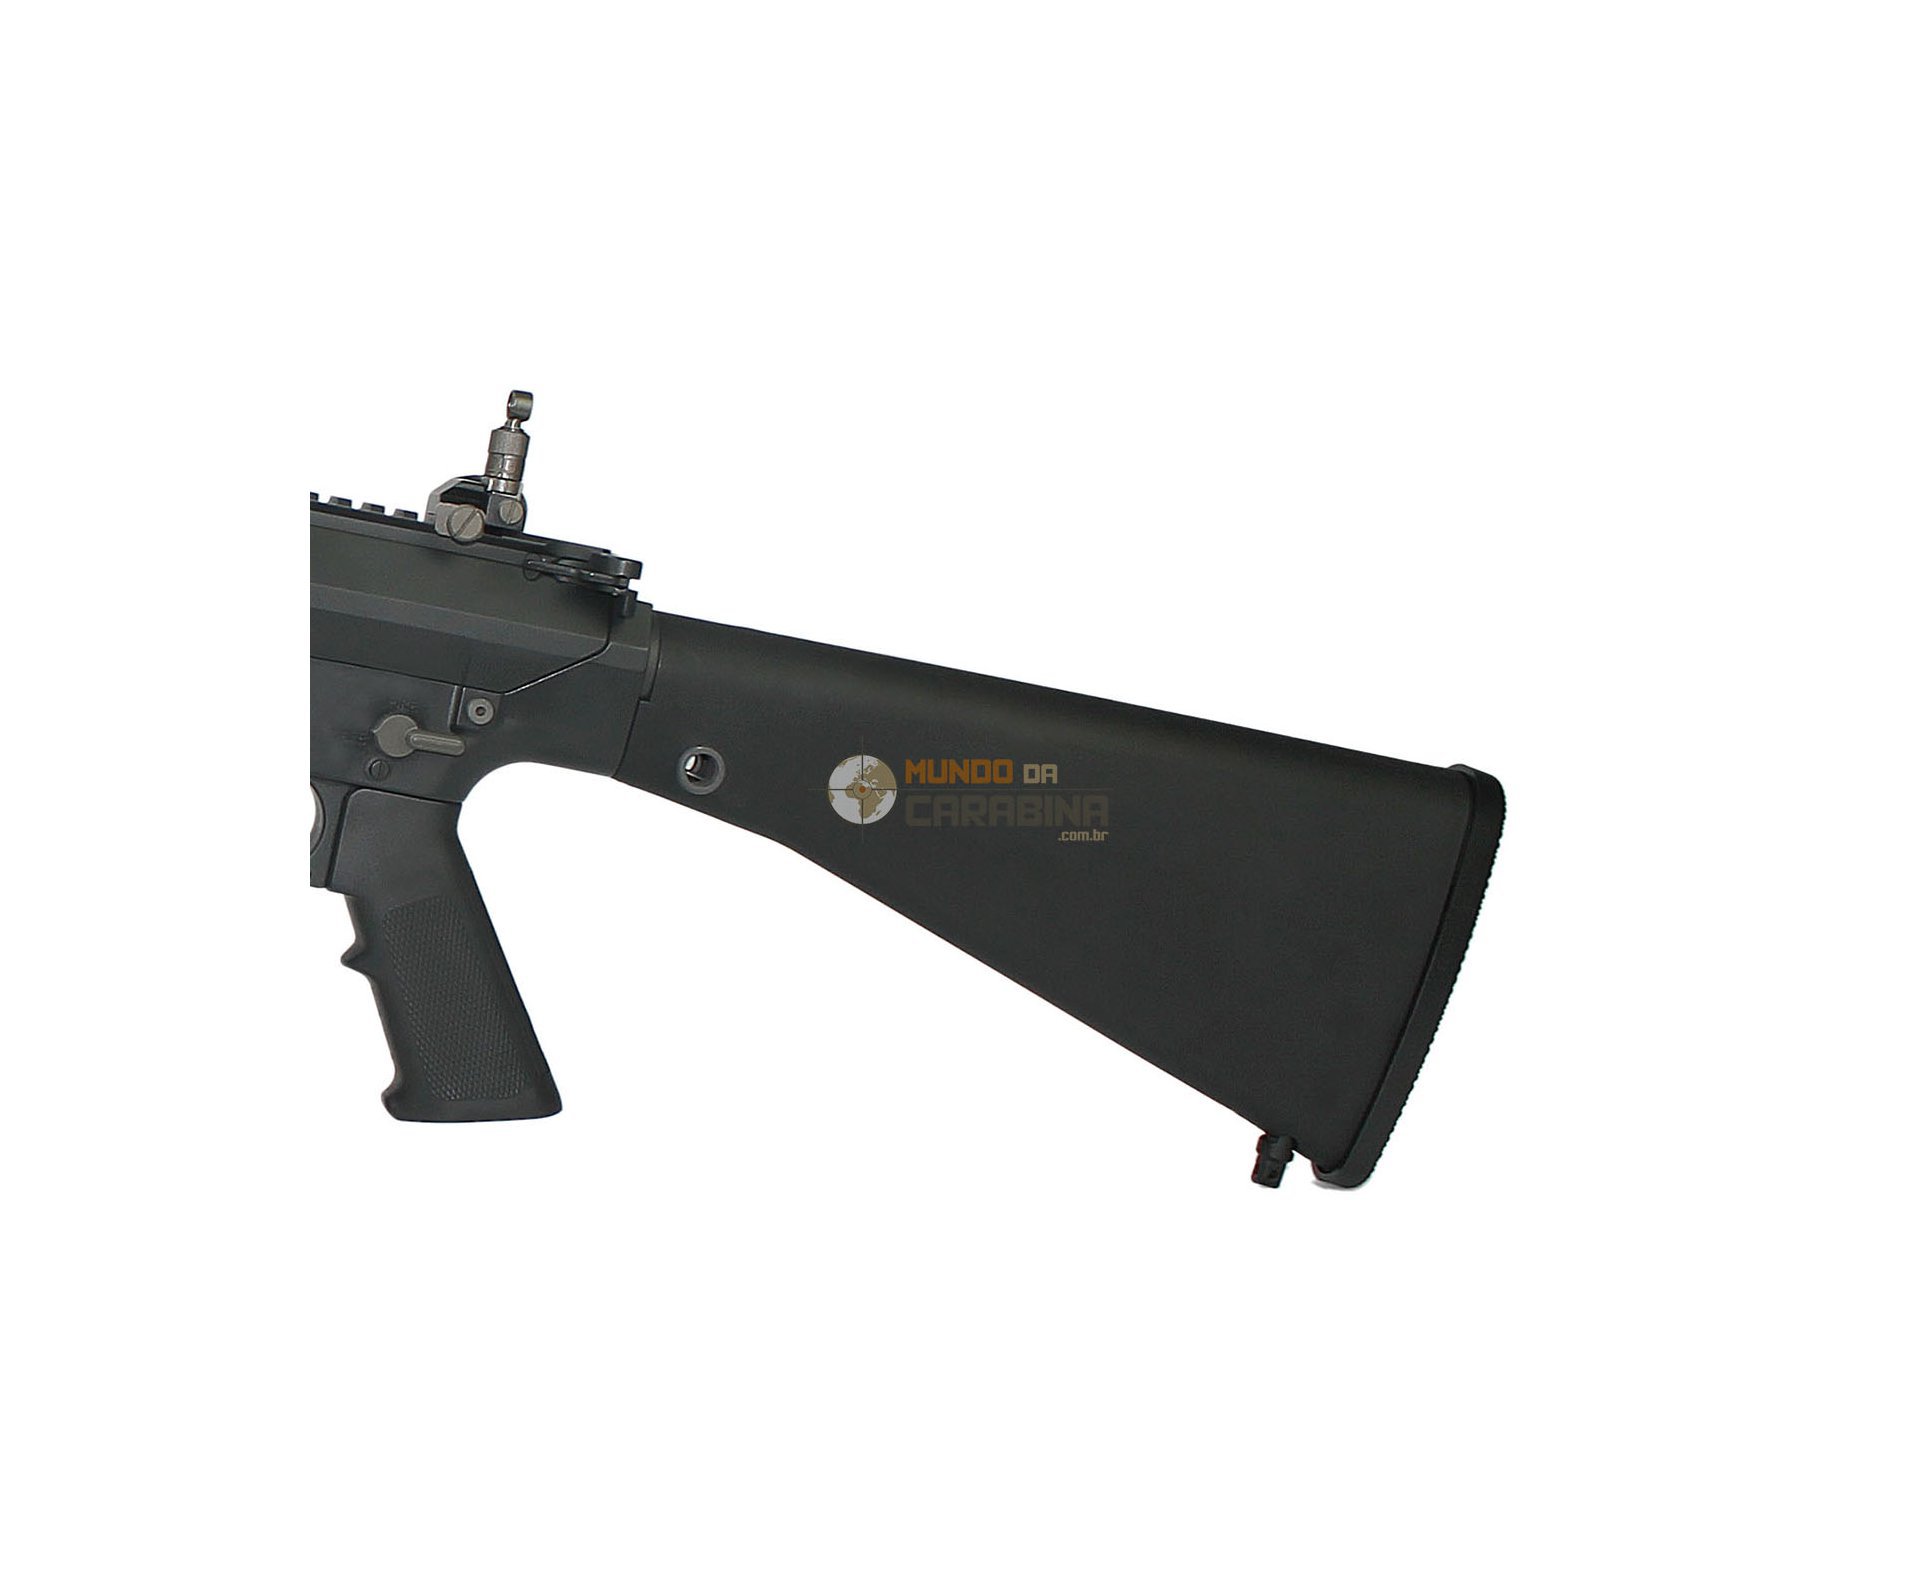 Rifle De Airsoft M110 Semi-auto Sniper System (sass) Full Metal - Ares